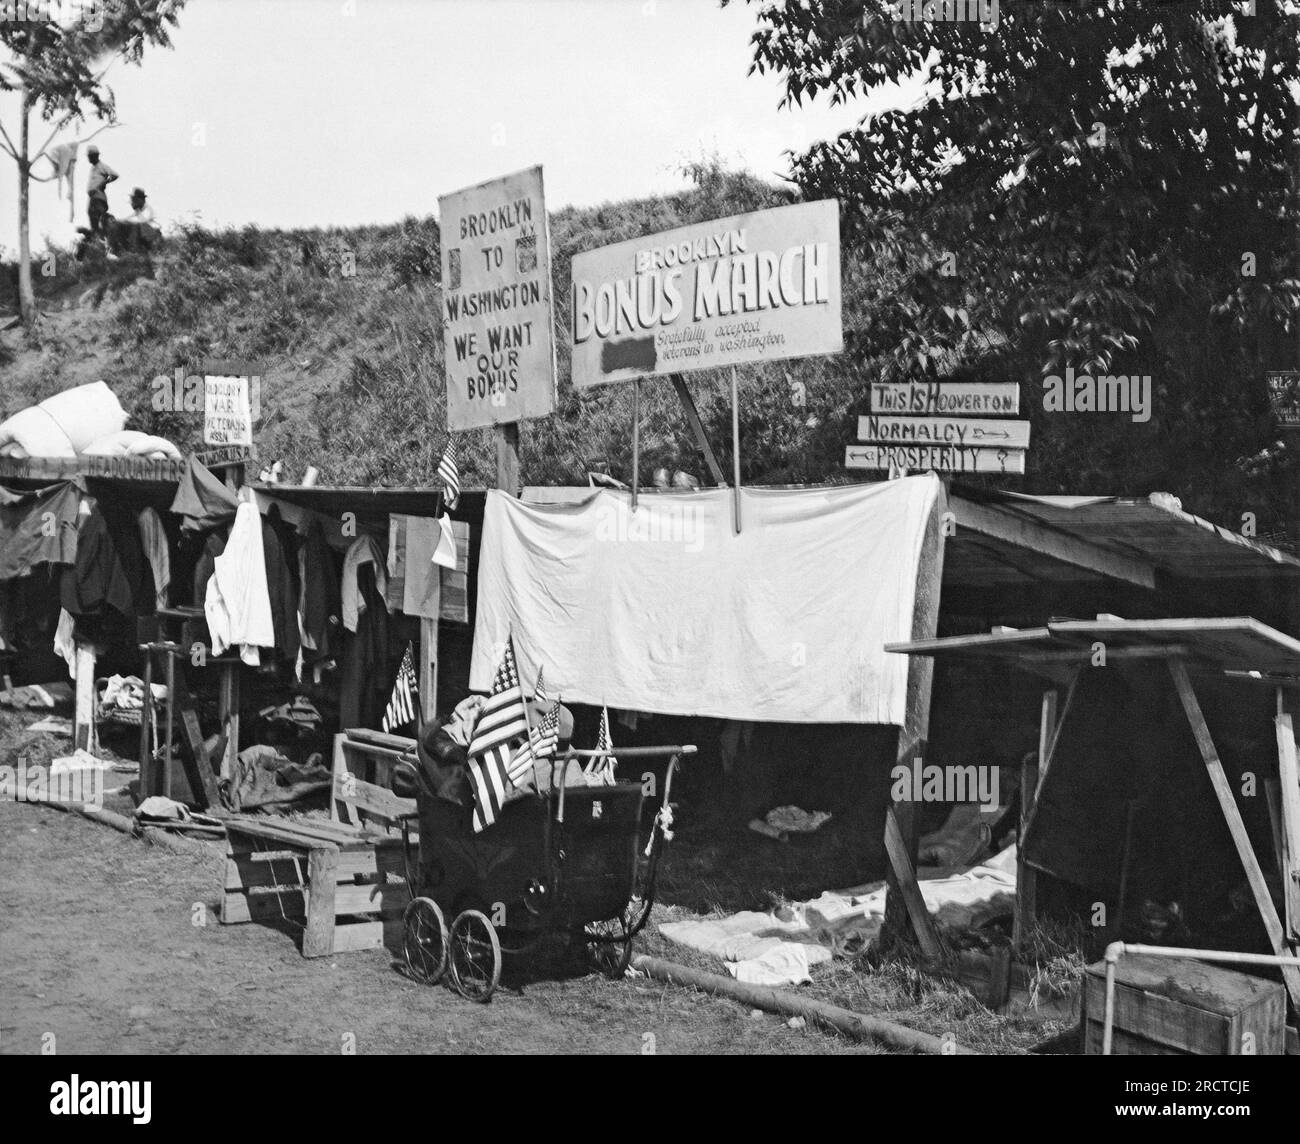 Washington, D.C.:  1932. An encampment of shanties built by Brooklyn veterans in the Bonus Expeditionary Forces in Washington, D.C Stock Photo